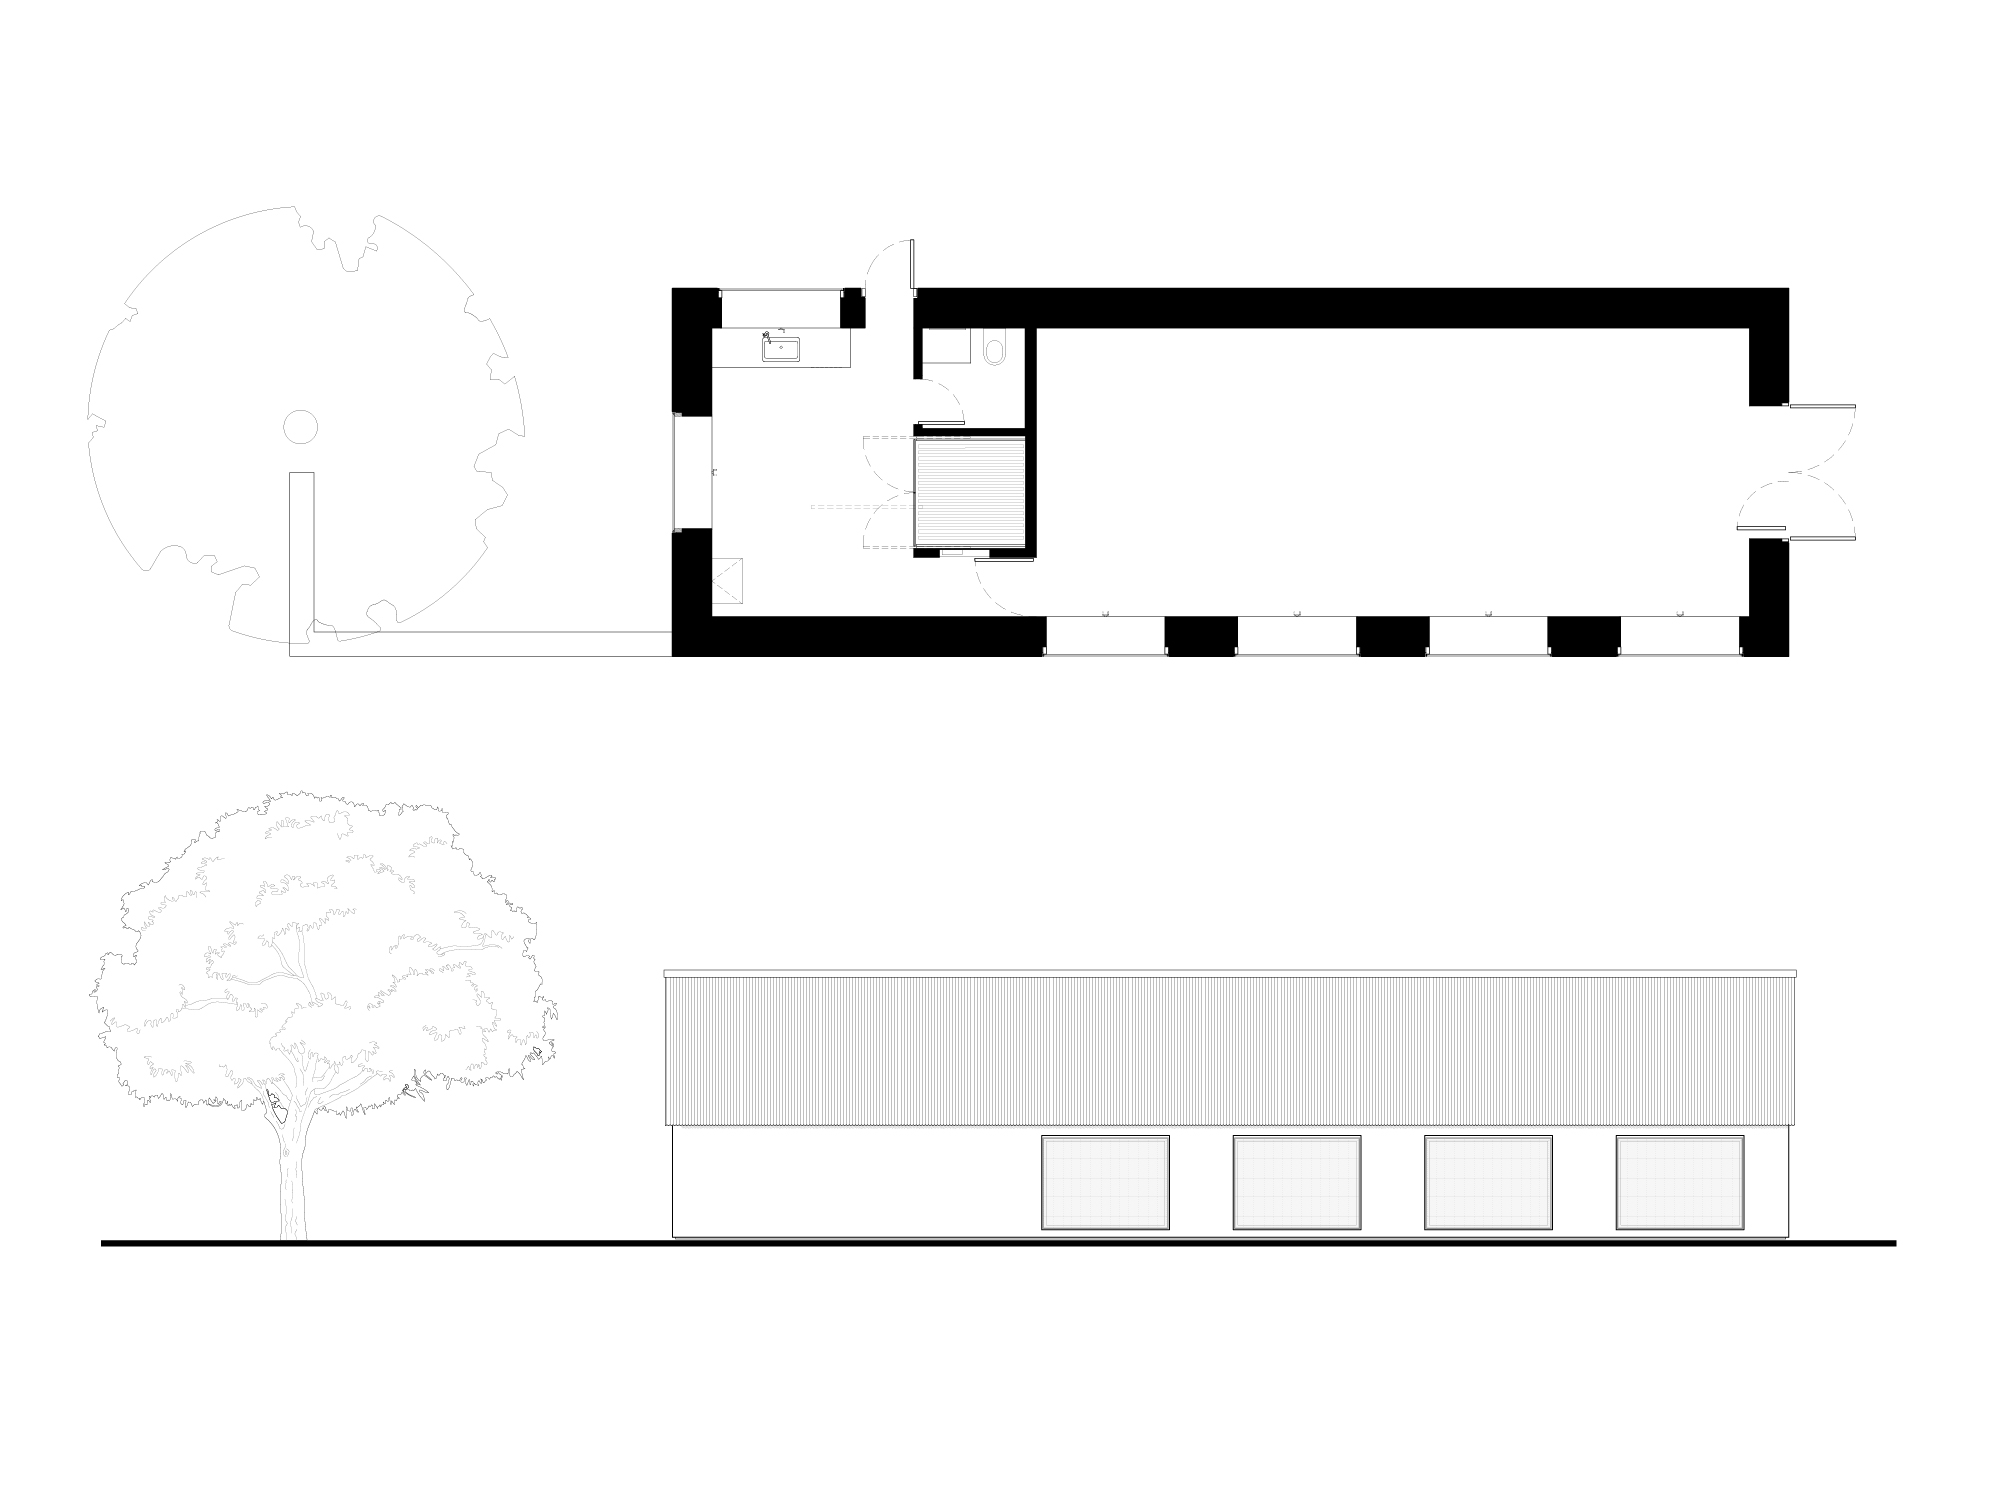 Artist studio plan and elevation drawings by Kevin Shcorn